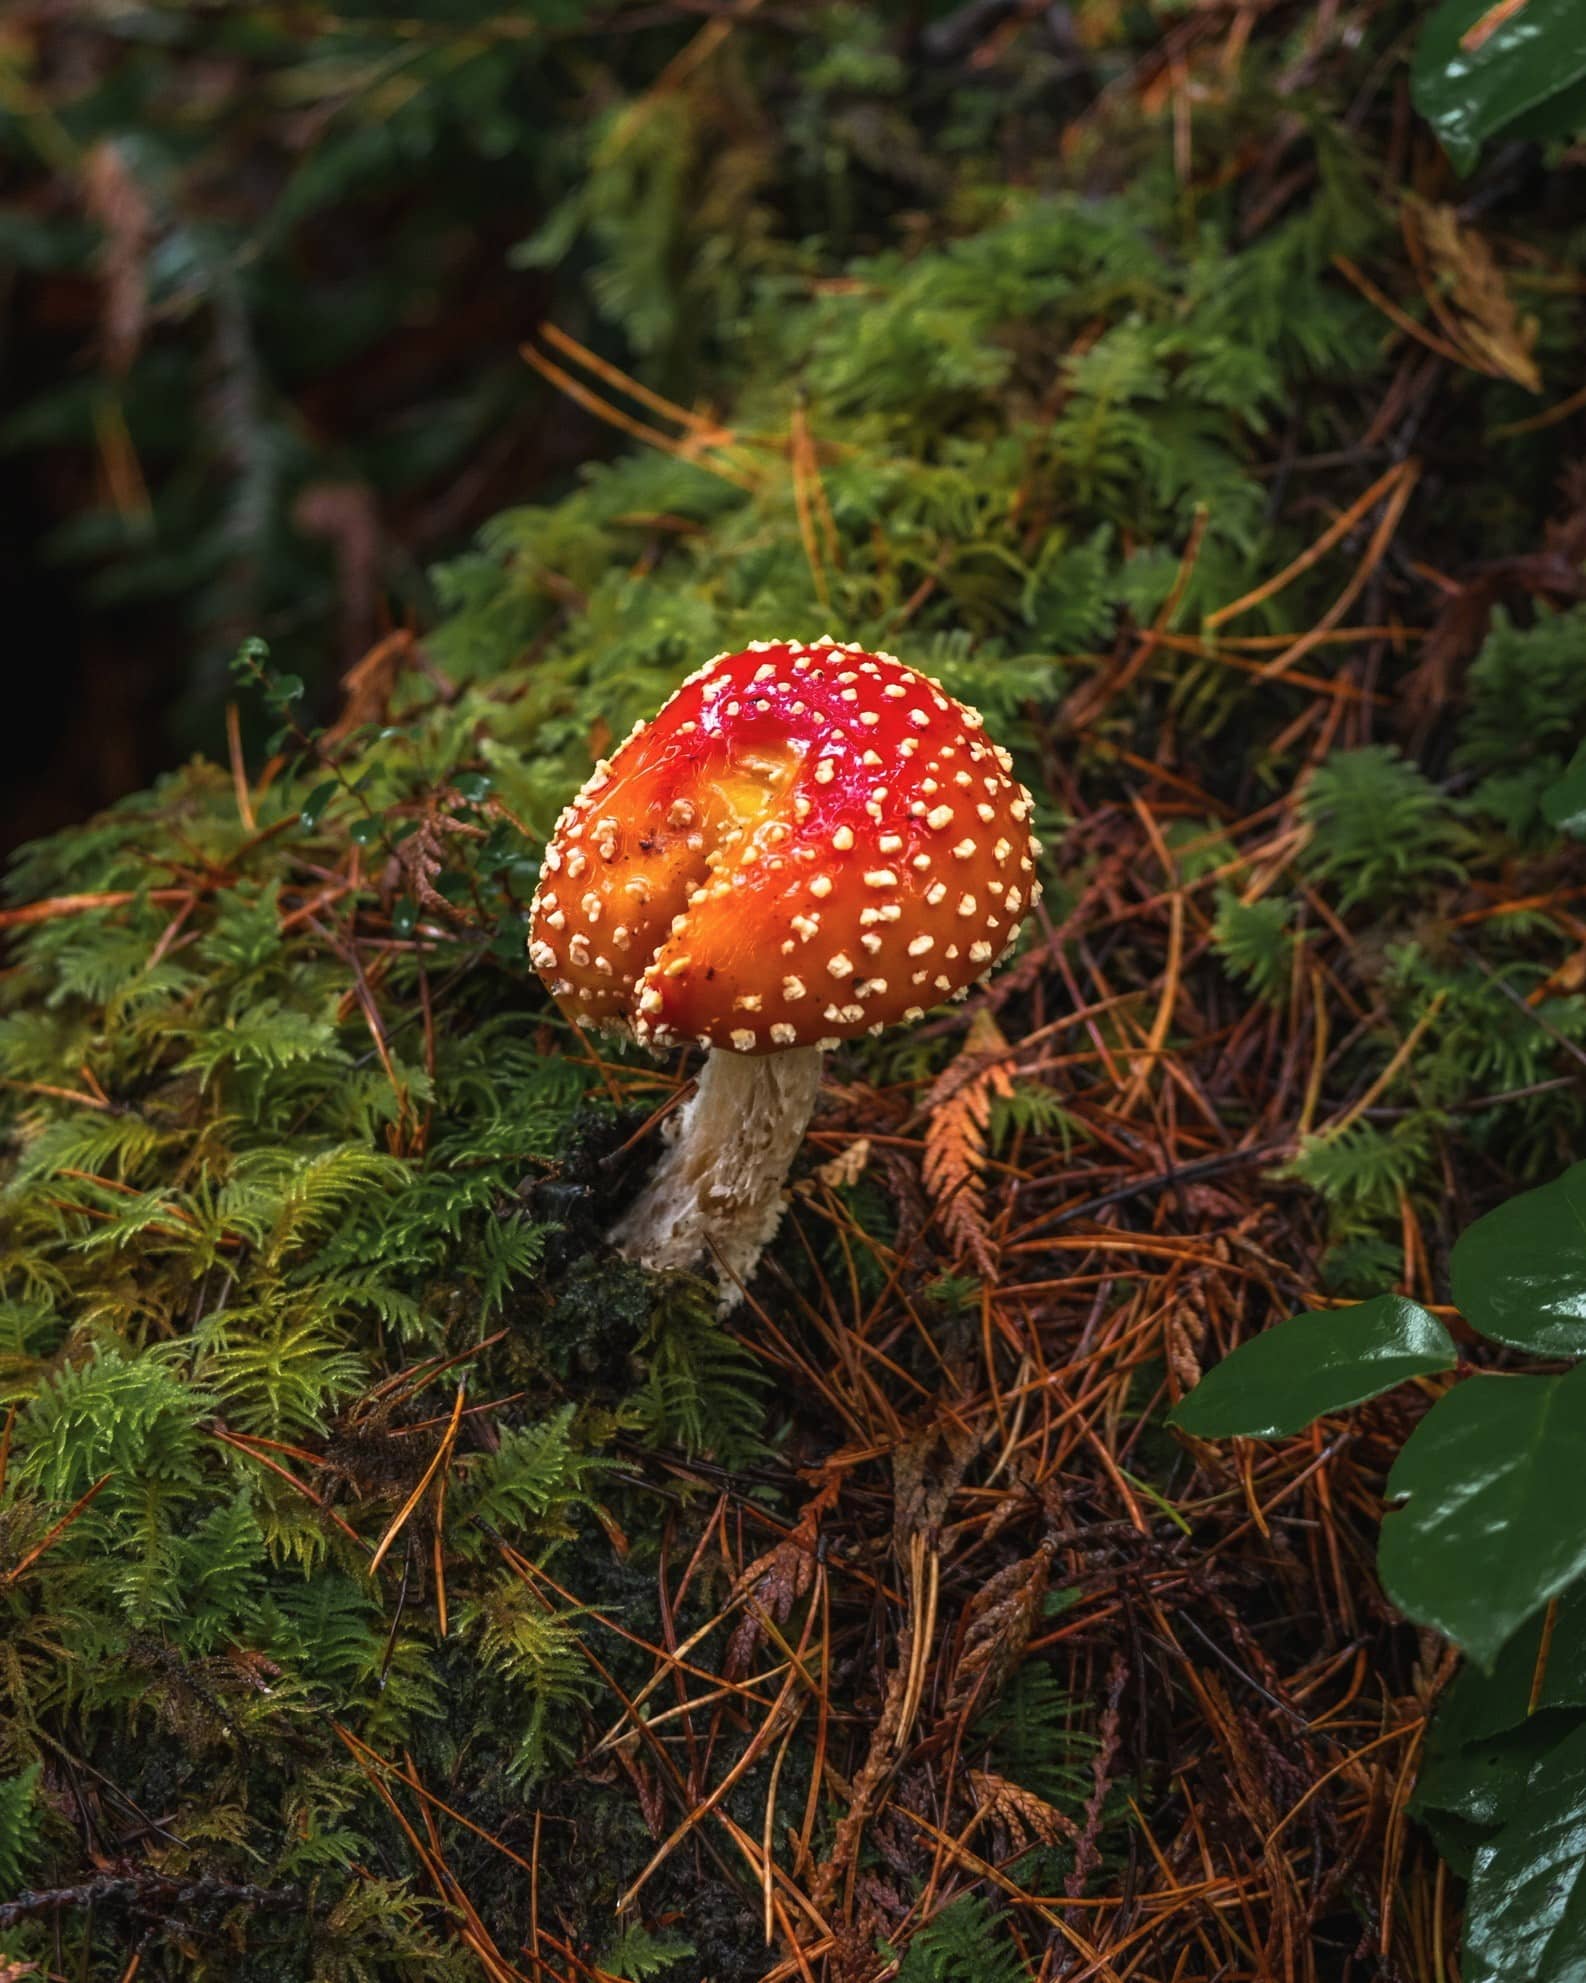 Red mushroom with white spots growing on a pine needle-covered forest floor